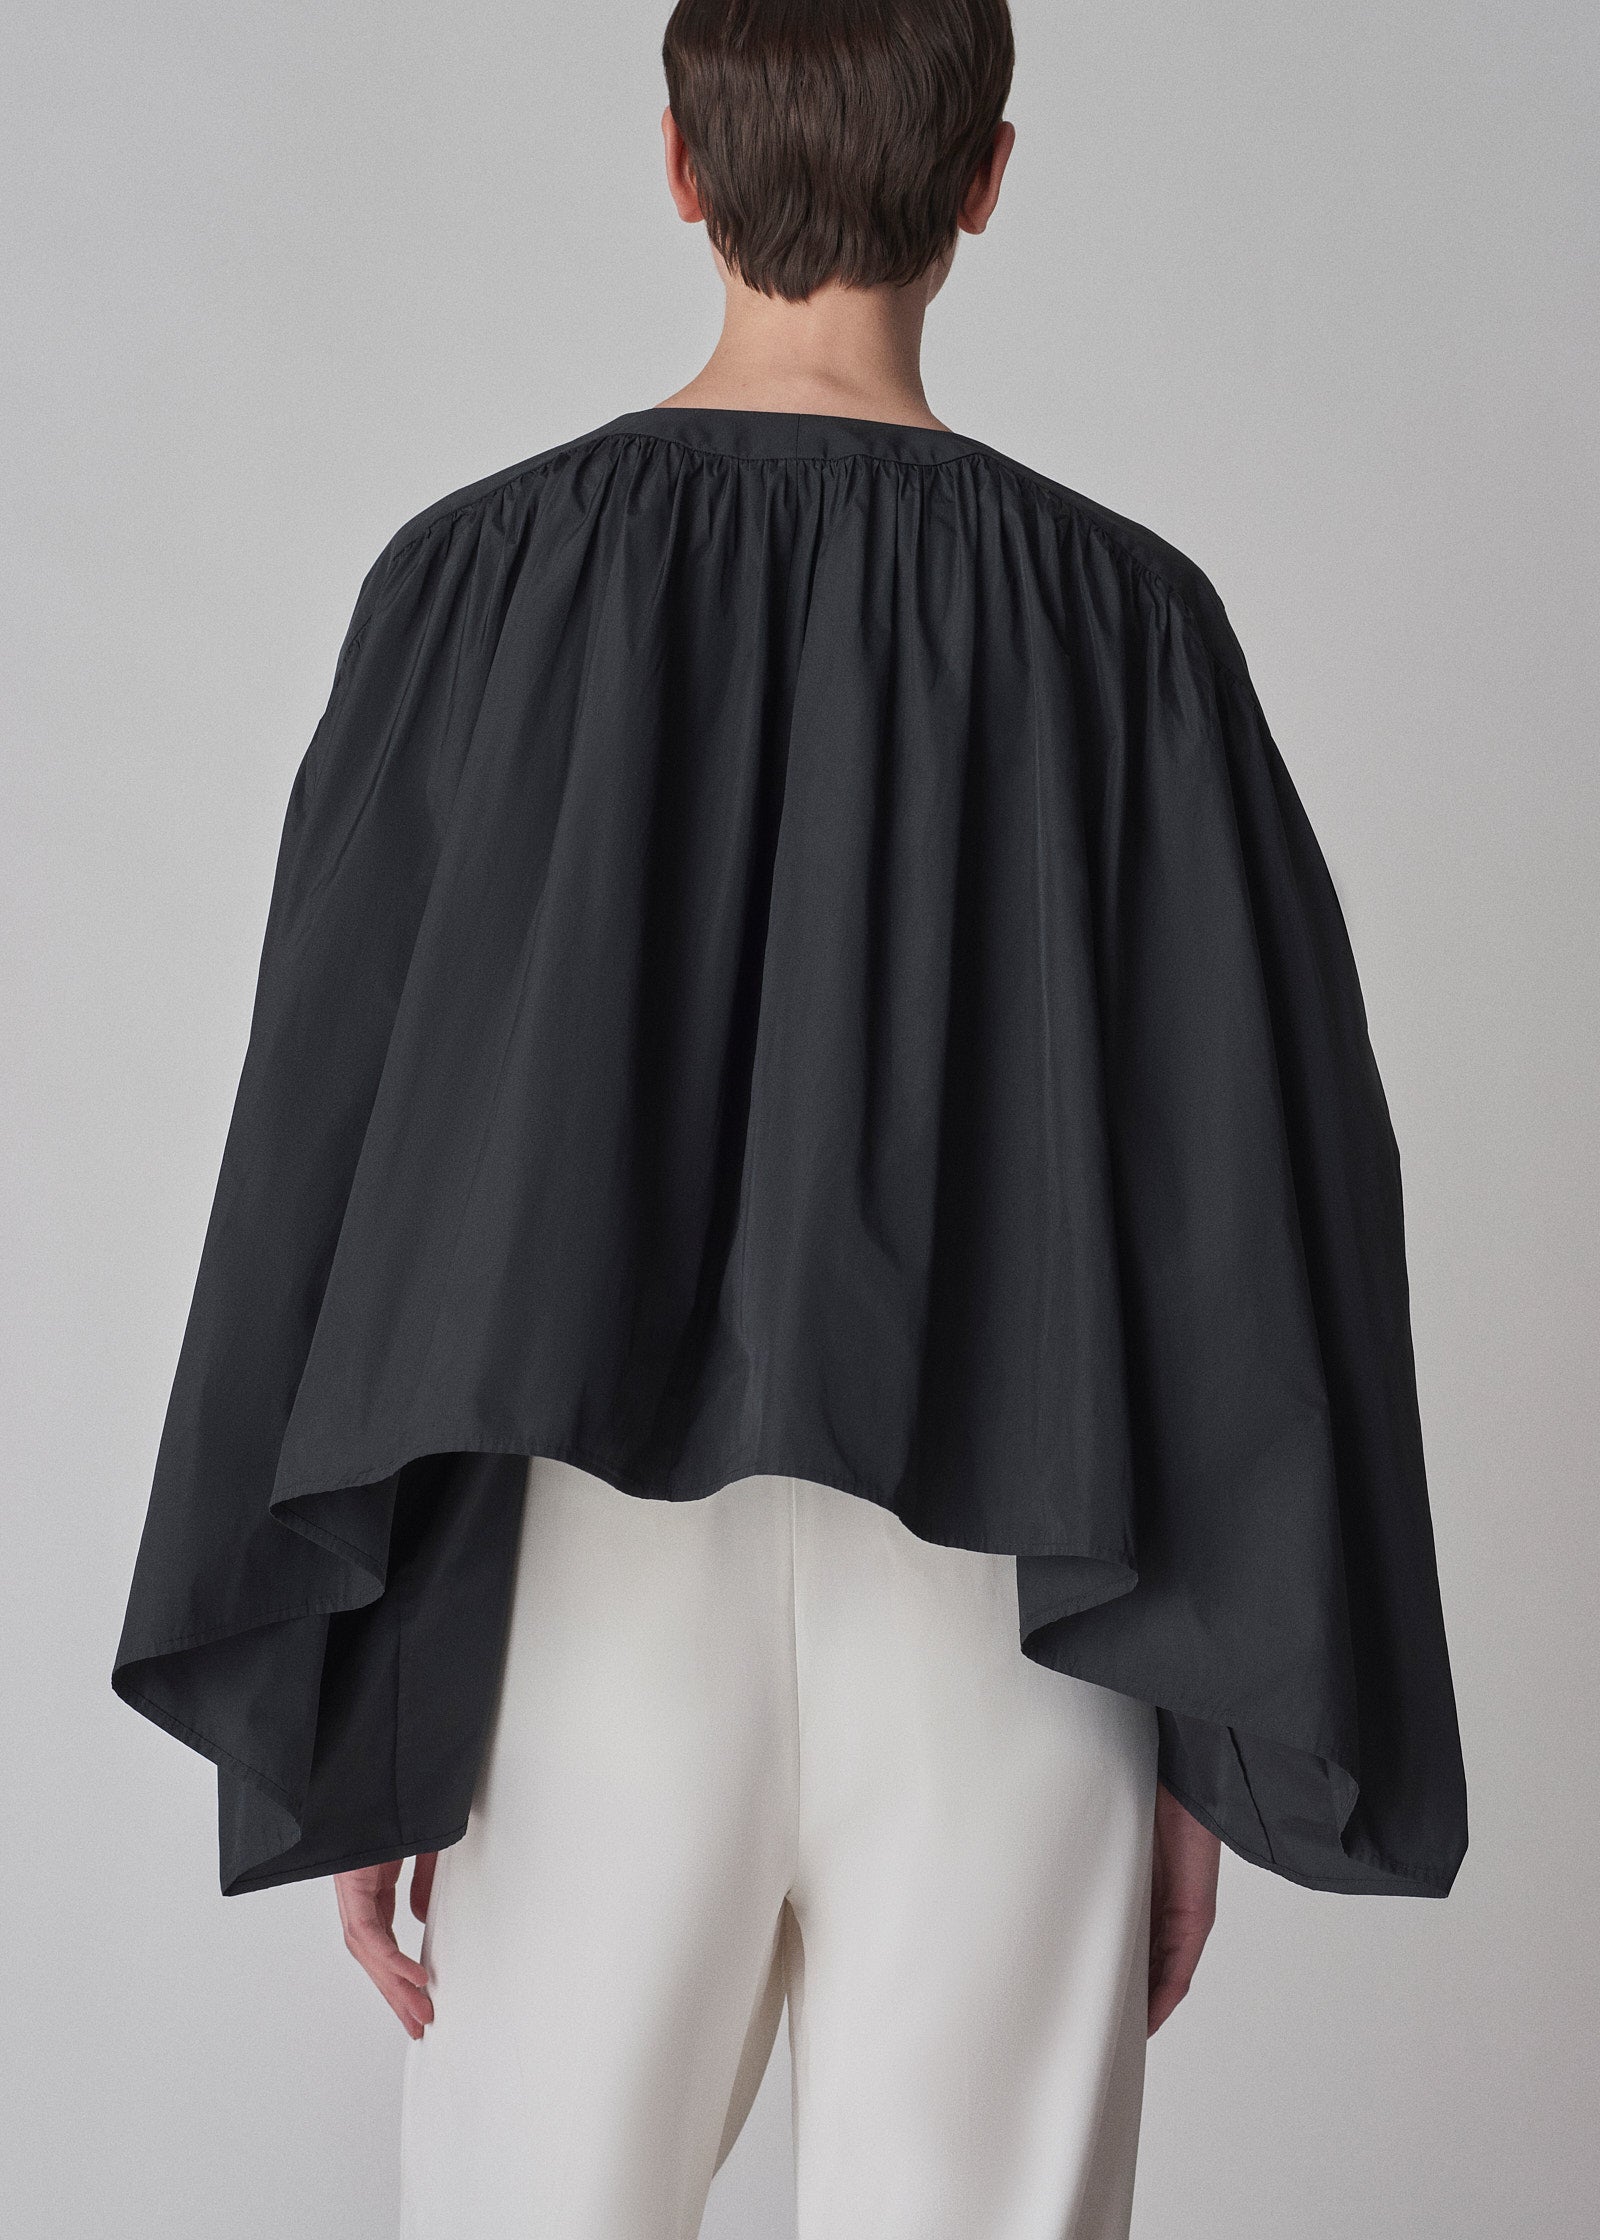 Gathered Tunic Blouse in Taffeta - Black - CO Collections